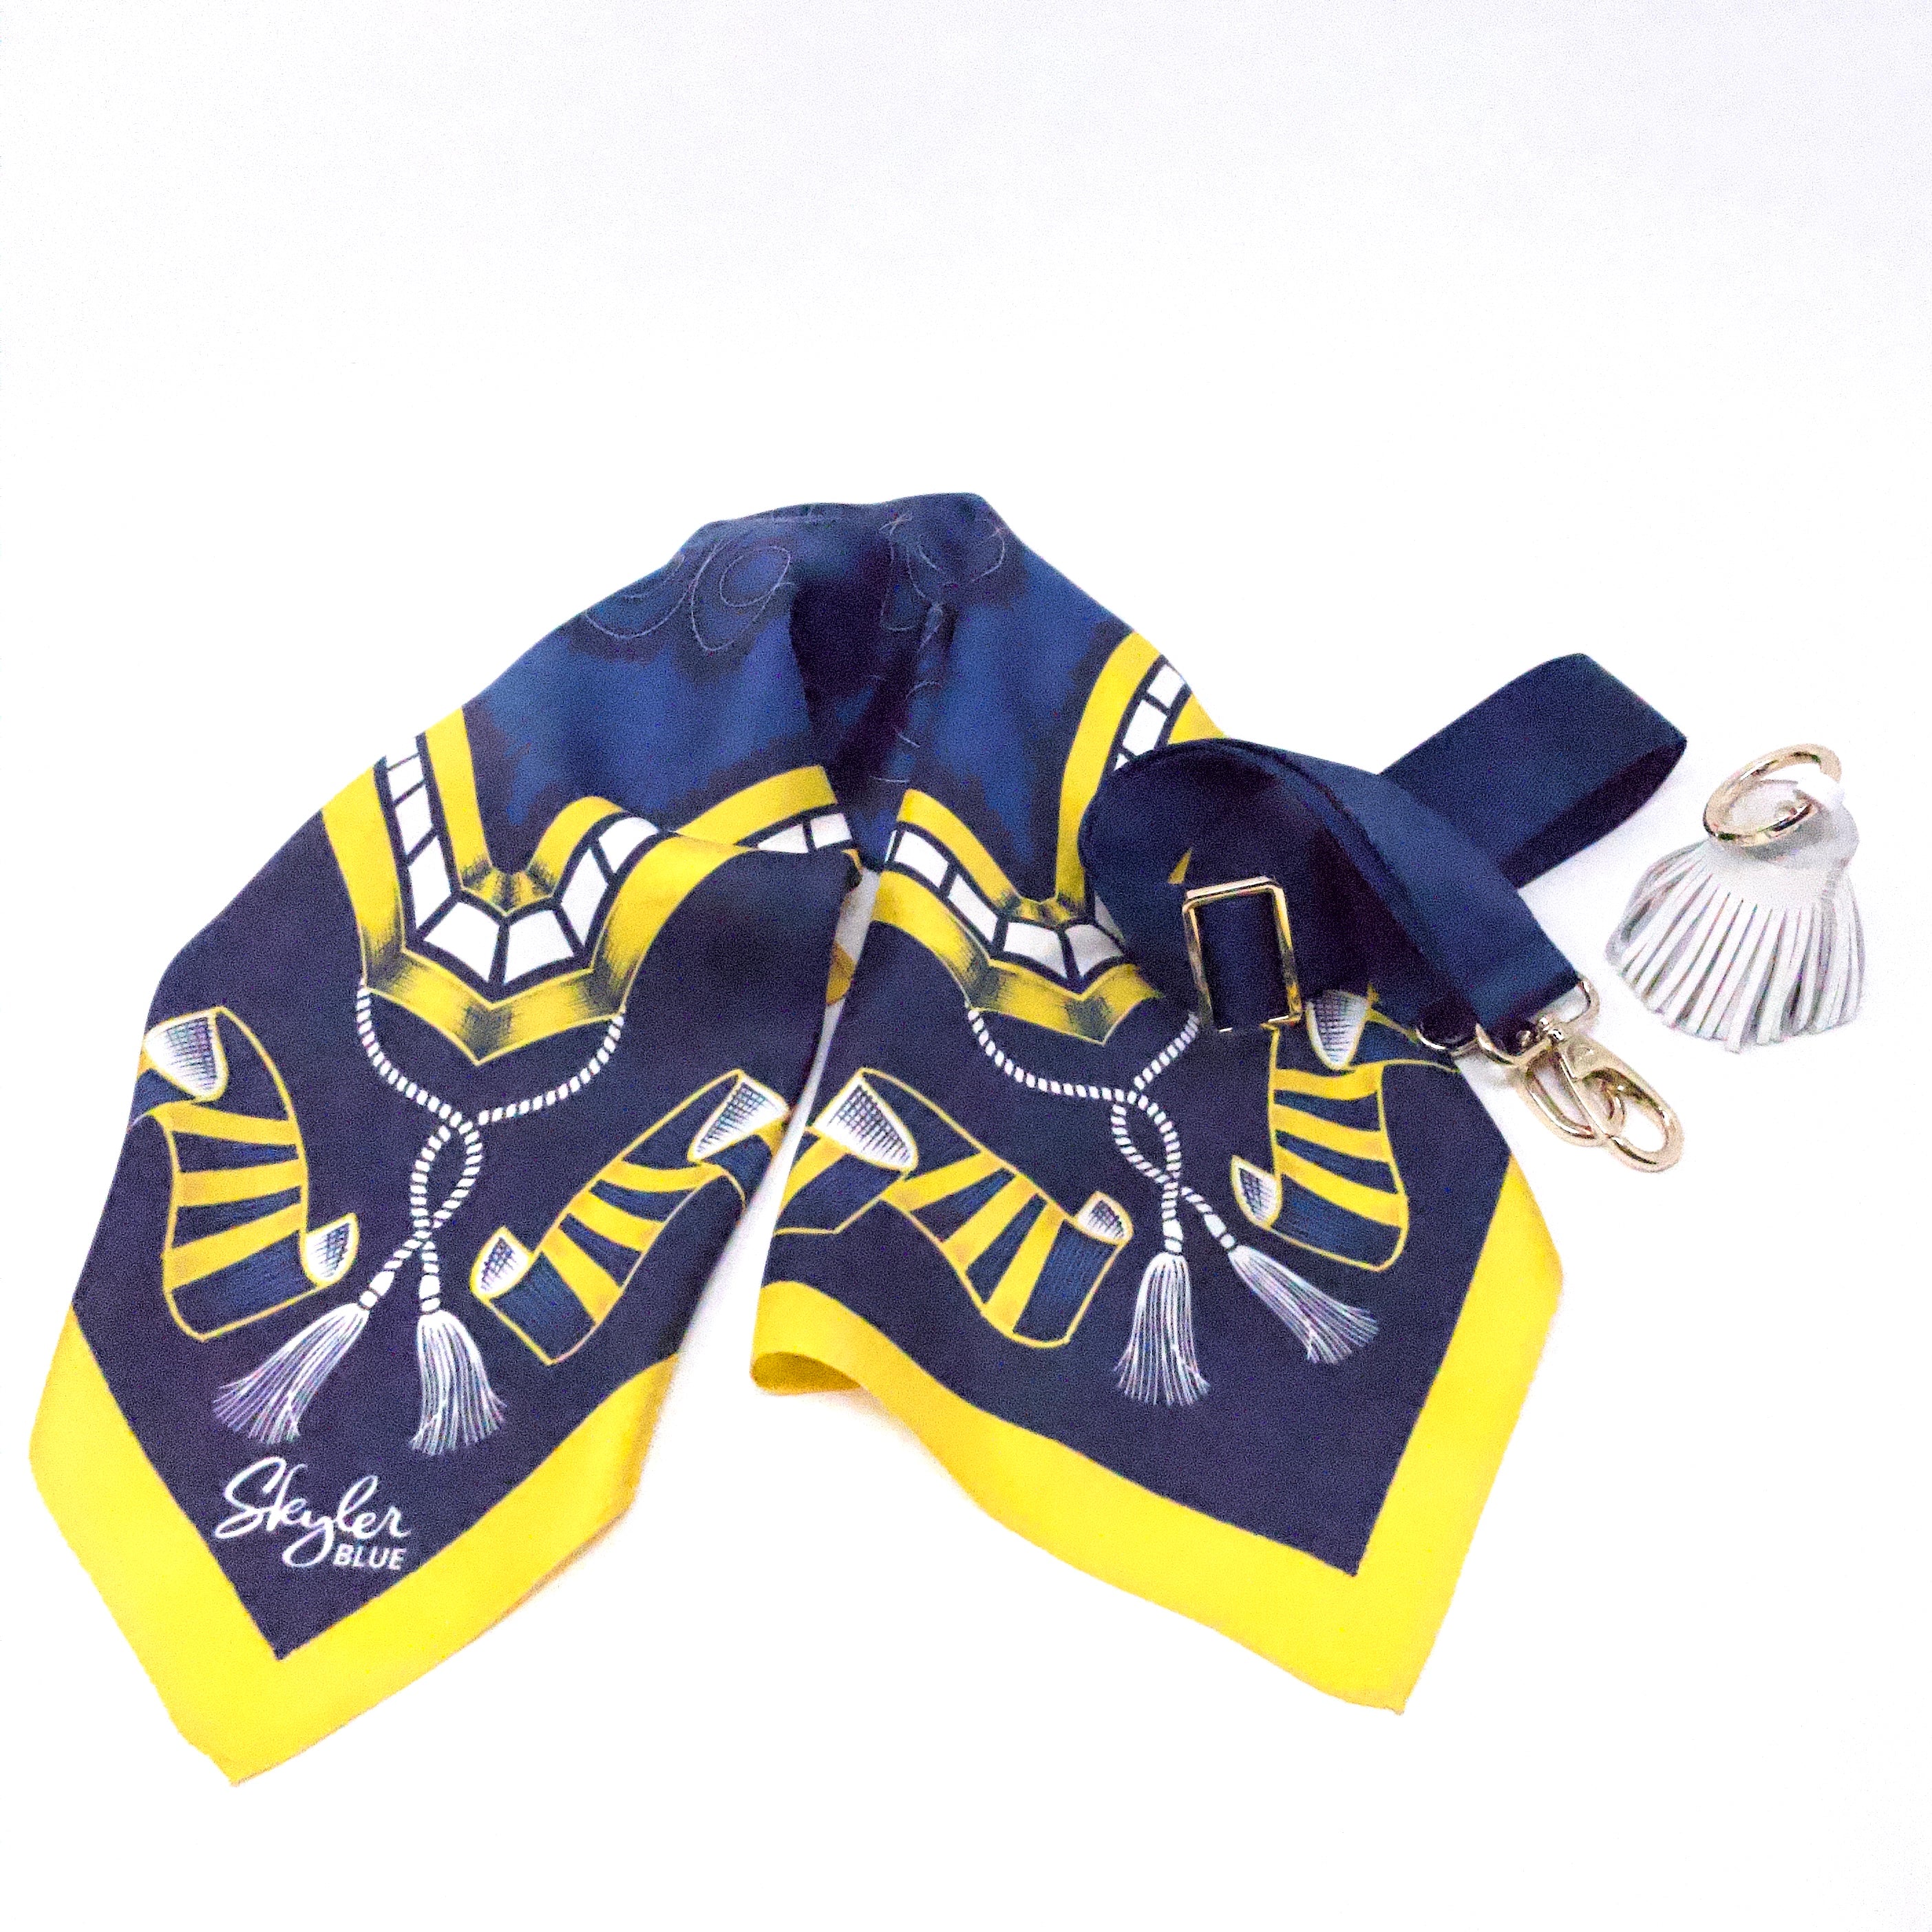 Skyler Blue’s The Ann Arbor Accessory Package including adjustable, nylon webbing shoulder or crossbody strap with herringbone weave and gold hardware, 60-centimeter 100% silk twill scarf, and 100% genuine leather tassel. 